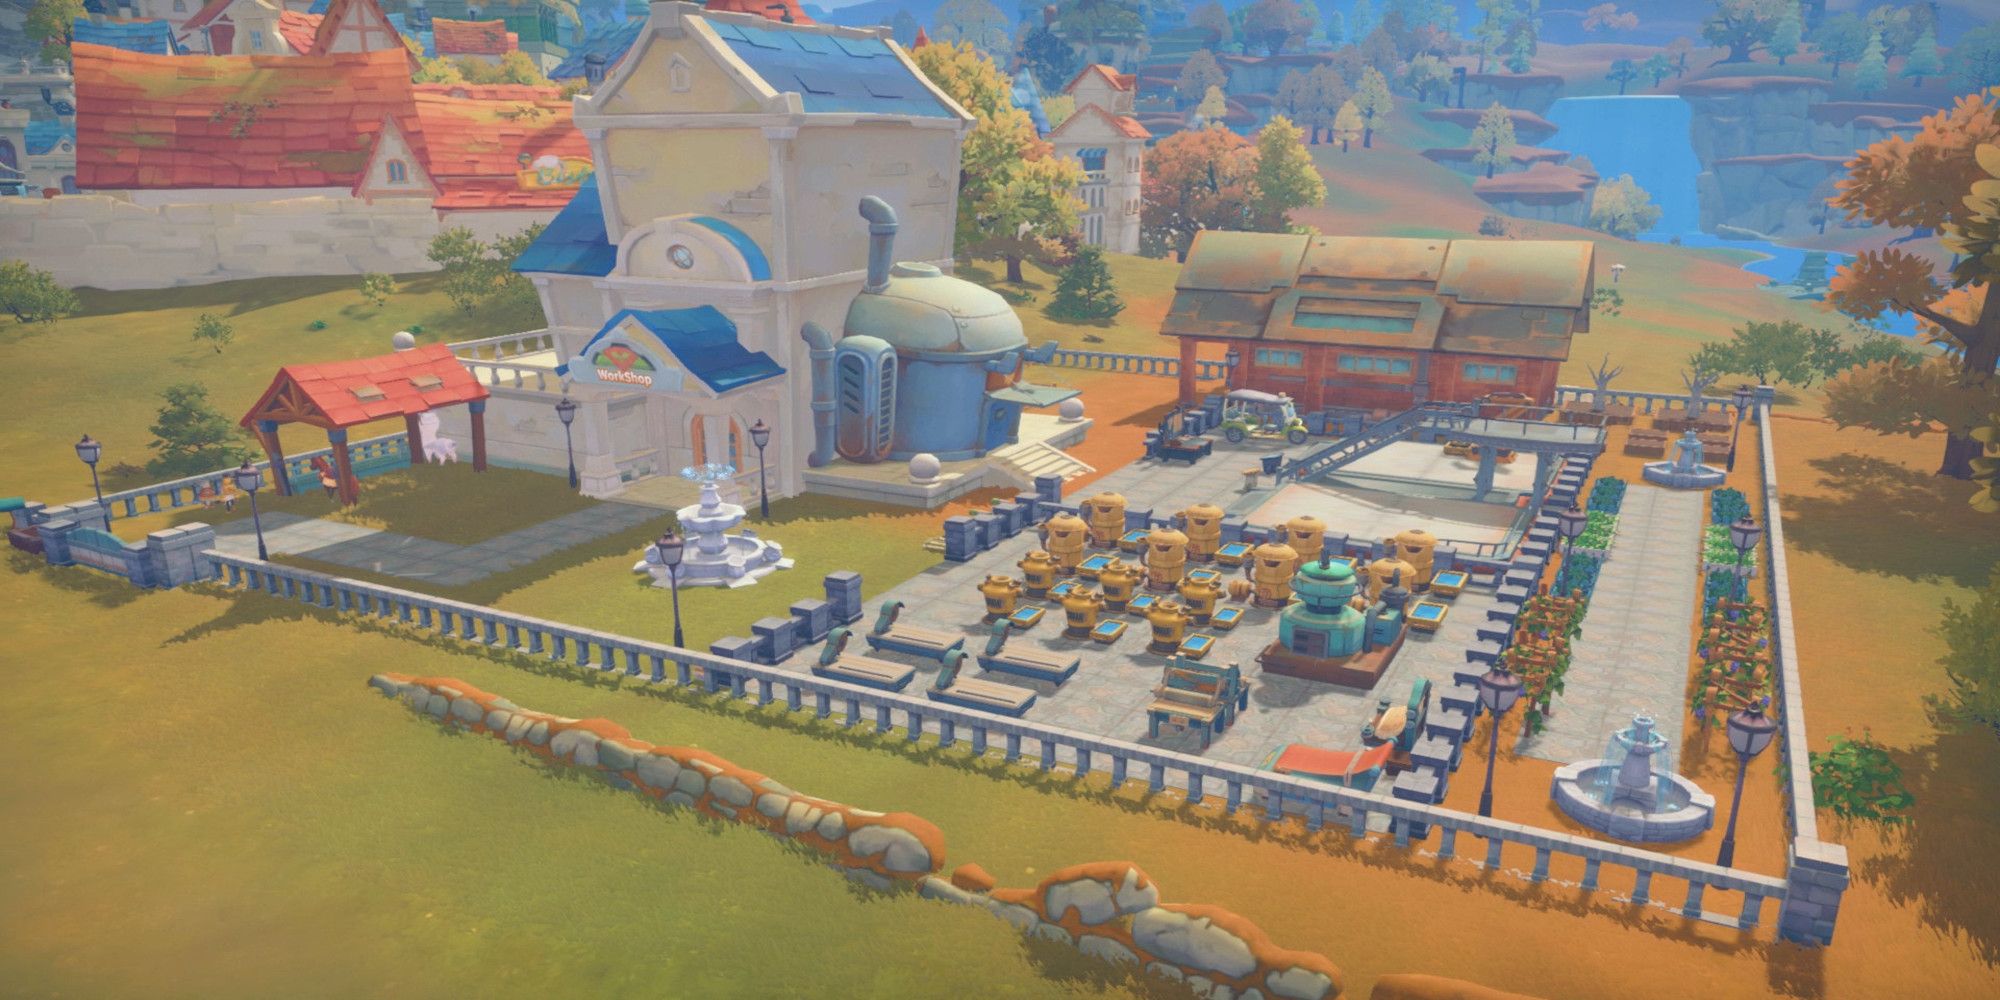 Overview of the workshop (My Time at Portia)